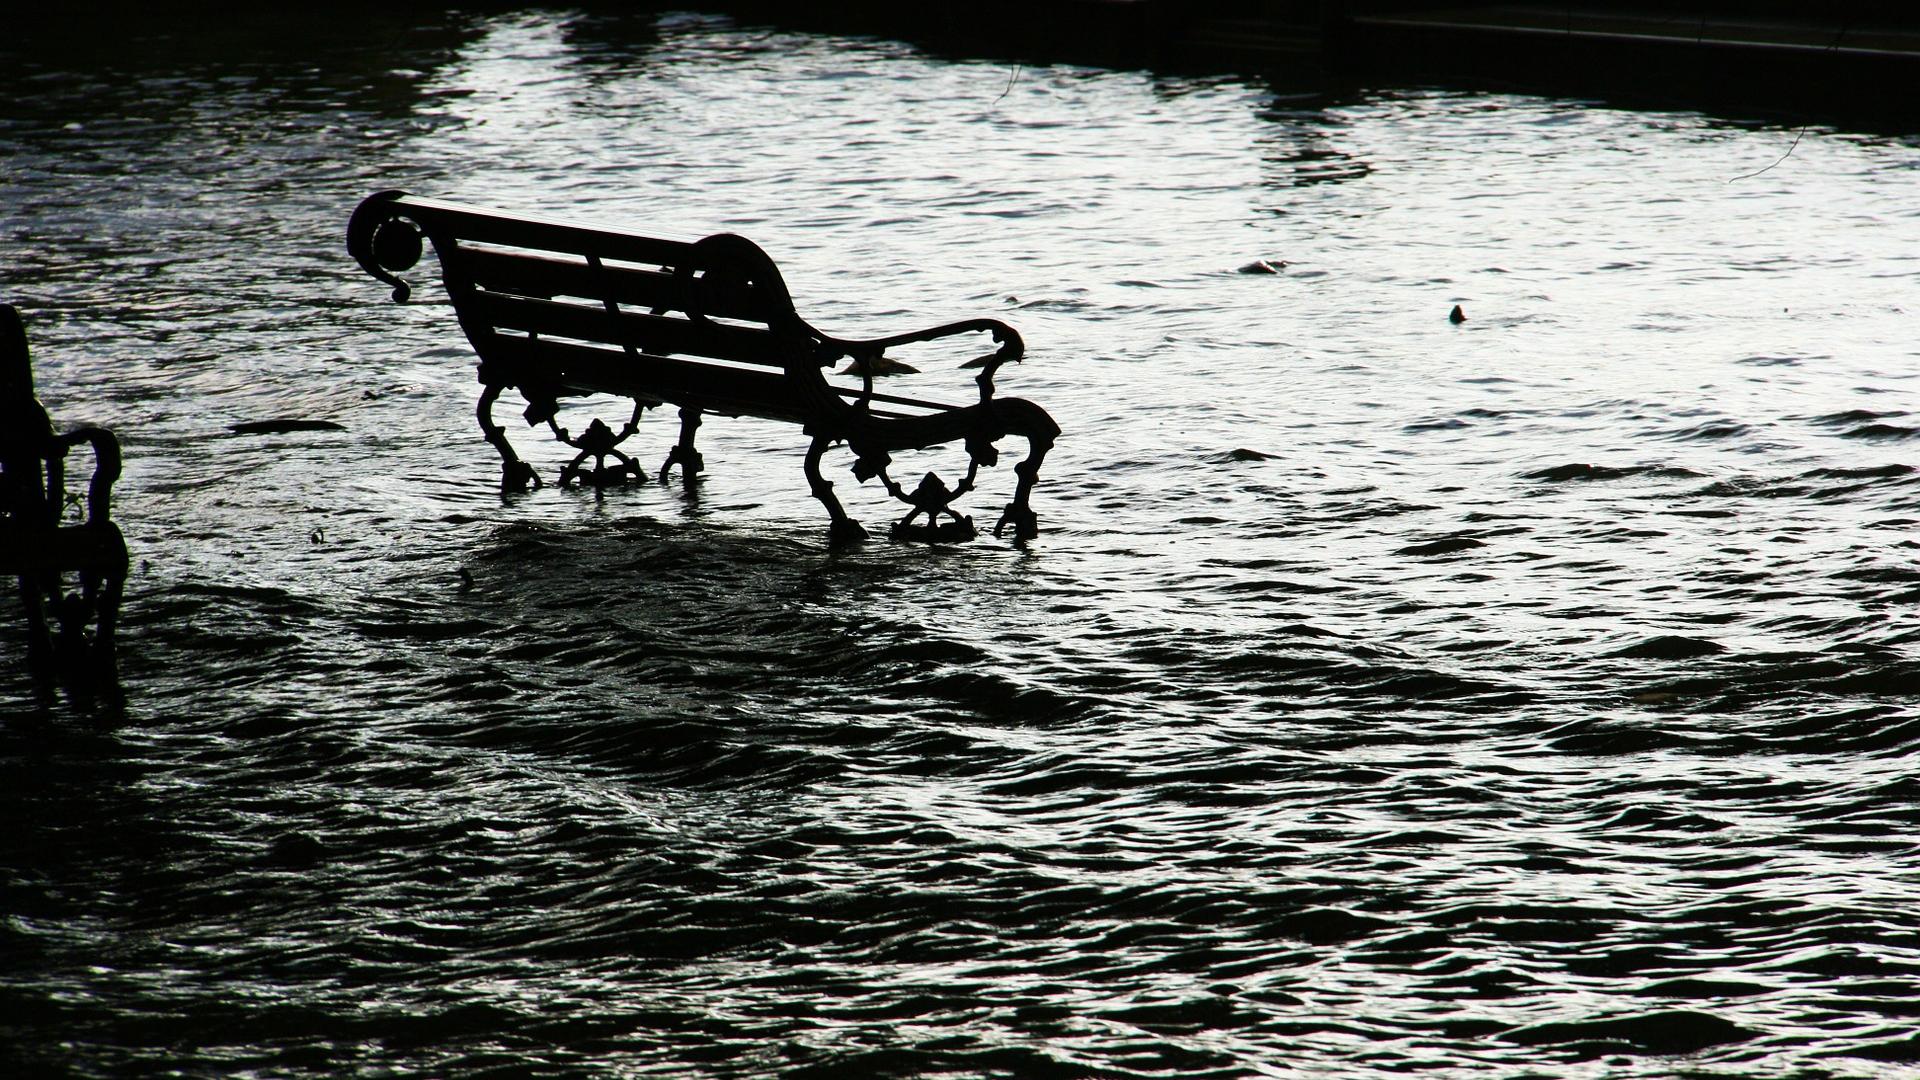 Park bench marooned in flood water